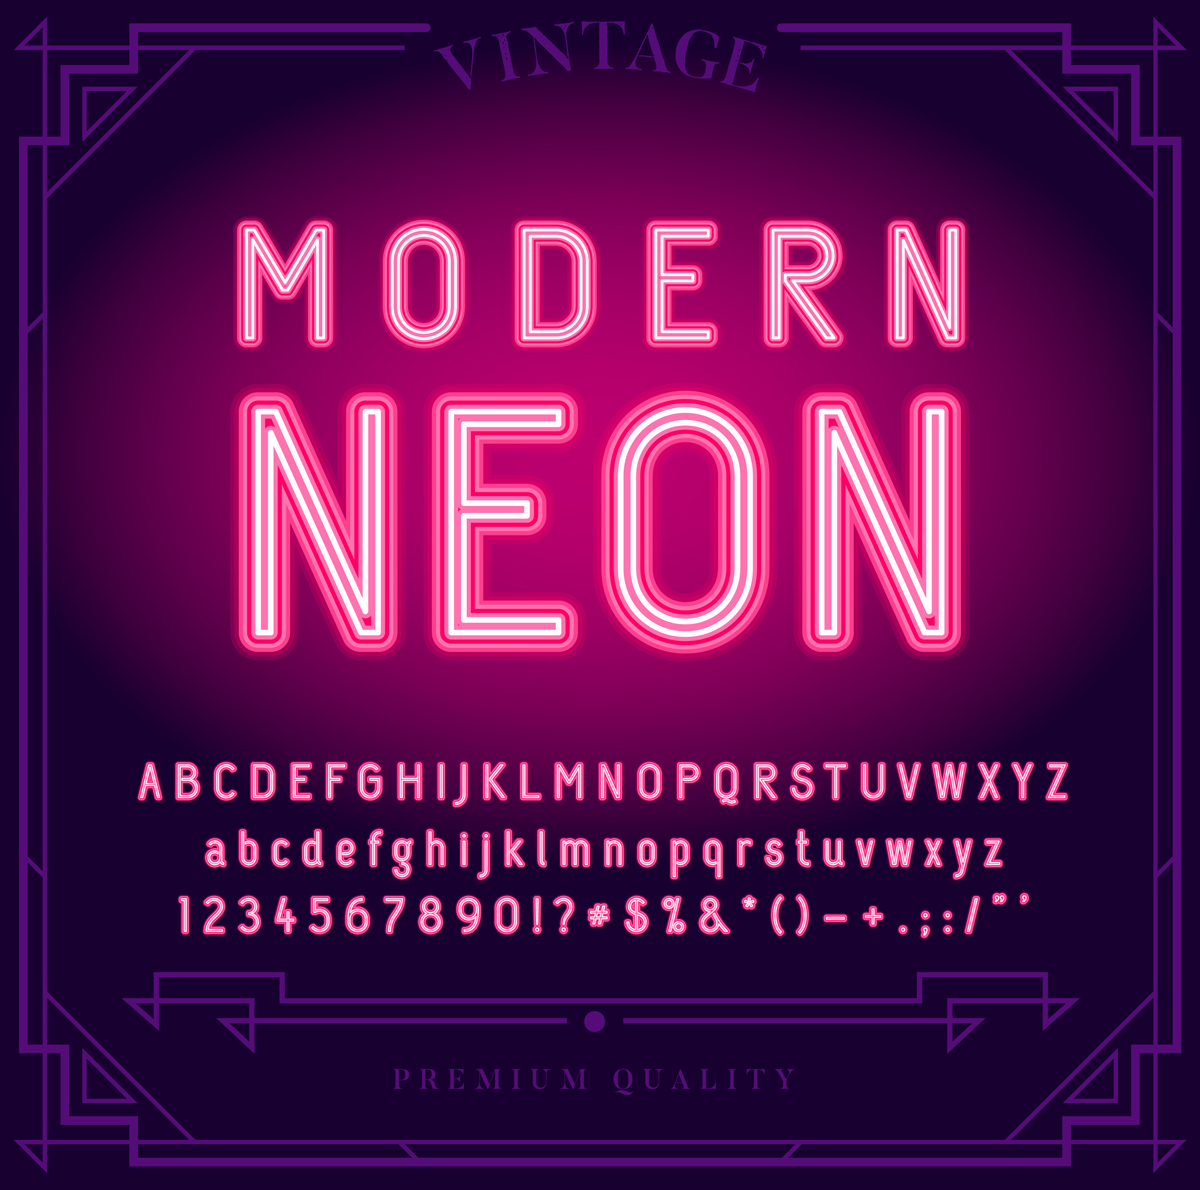 Character Set in Modern Neon Font